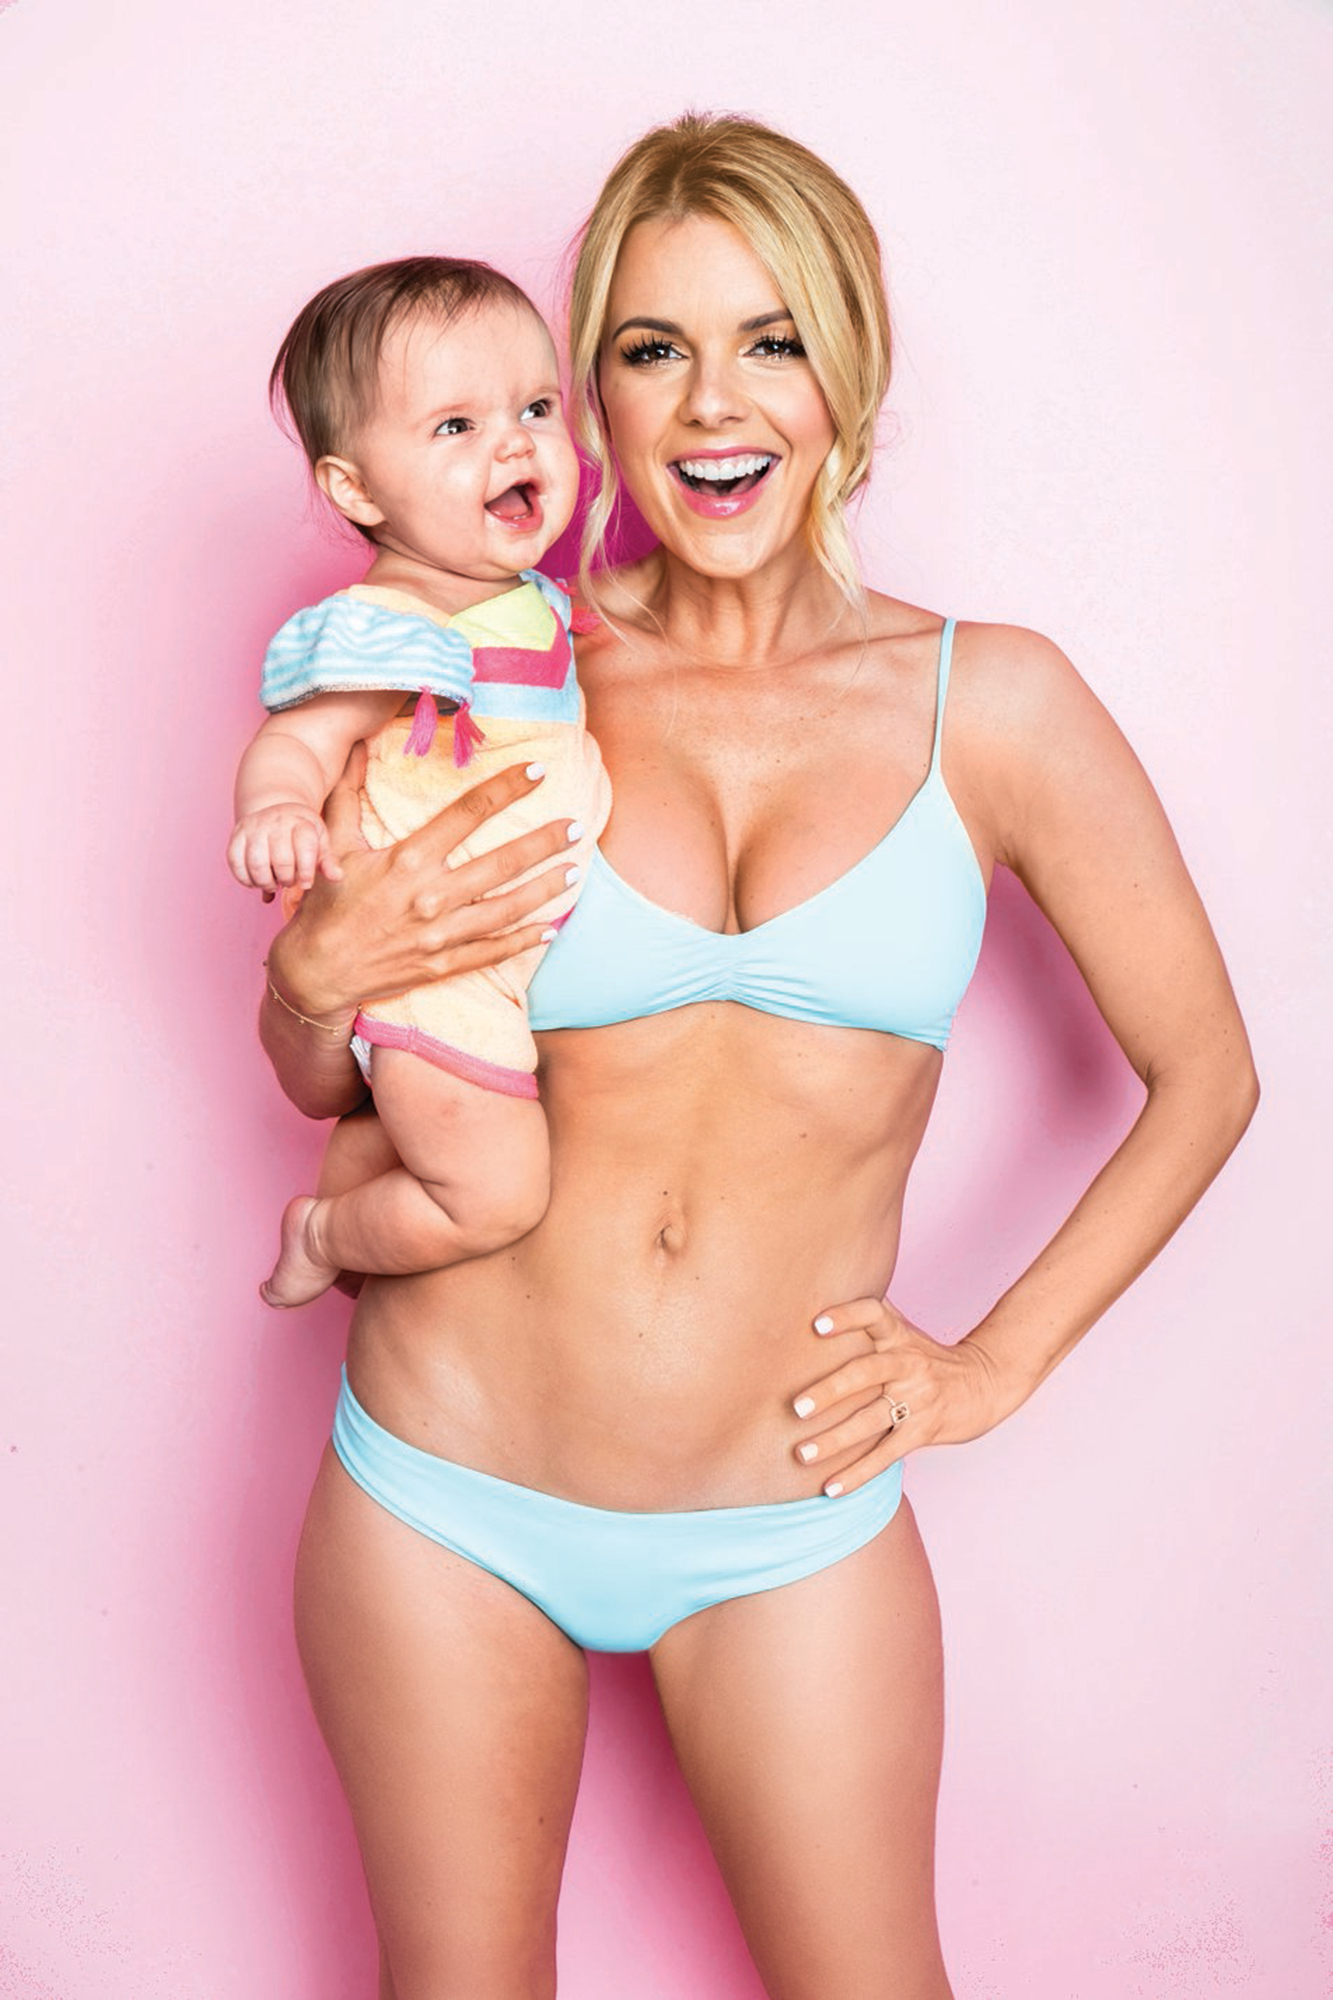 Ali Fedotowsky Reveals She Suffered a Miscarriage, Ali Fedotowsky